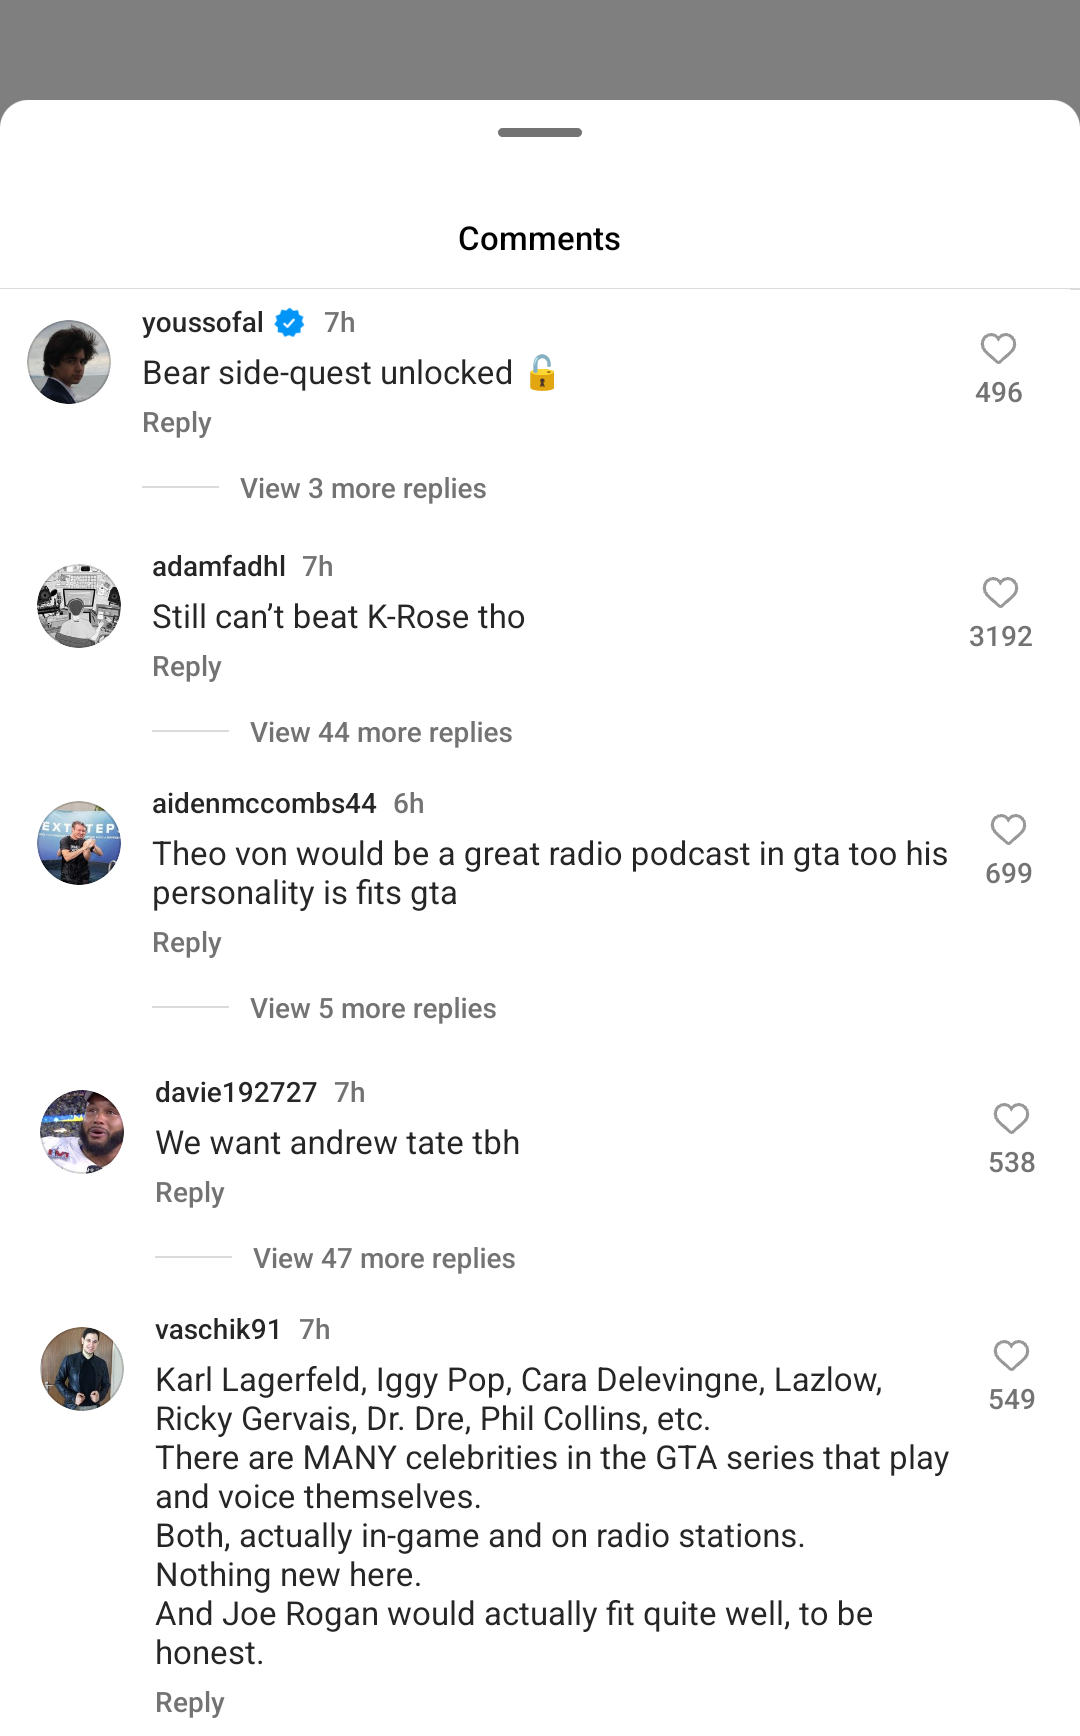 Fans commenting with their reactions and their suggestions for Podcasts in GTA 6